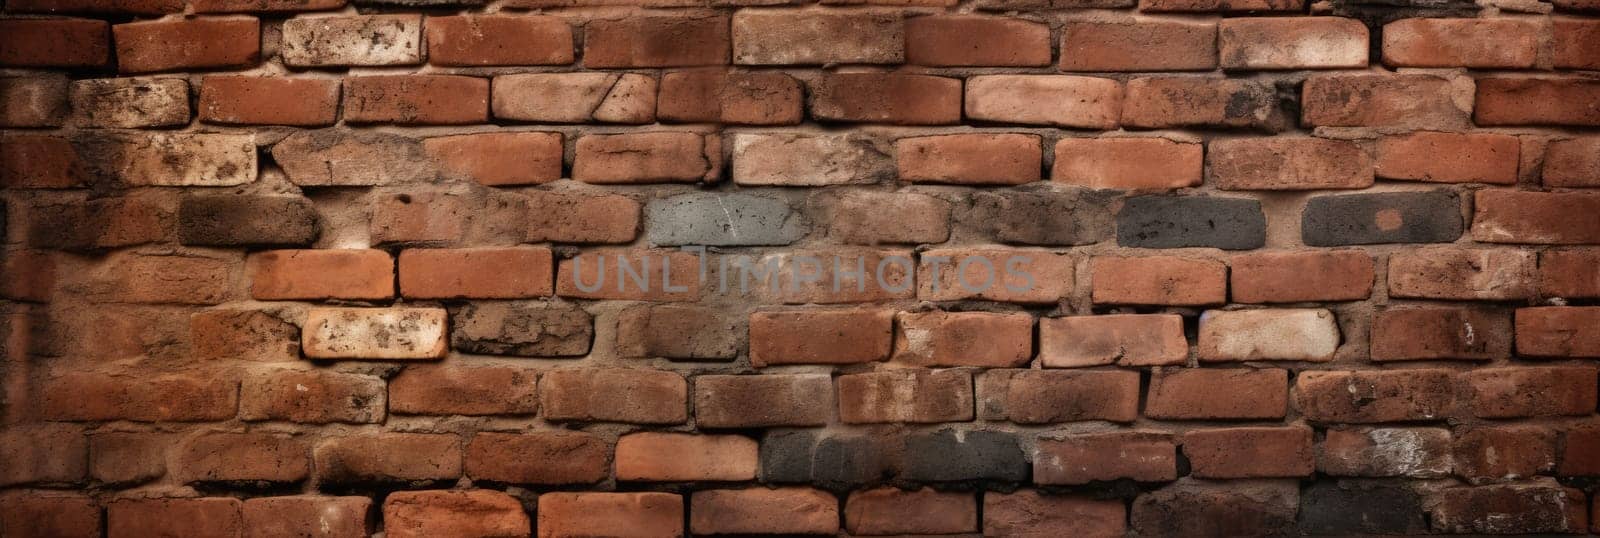 Abstract grunge brick wall texture background. Long banner format by natali_brill